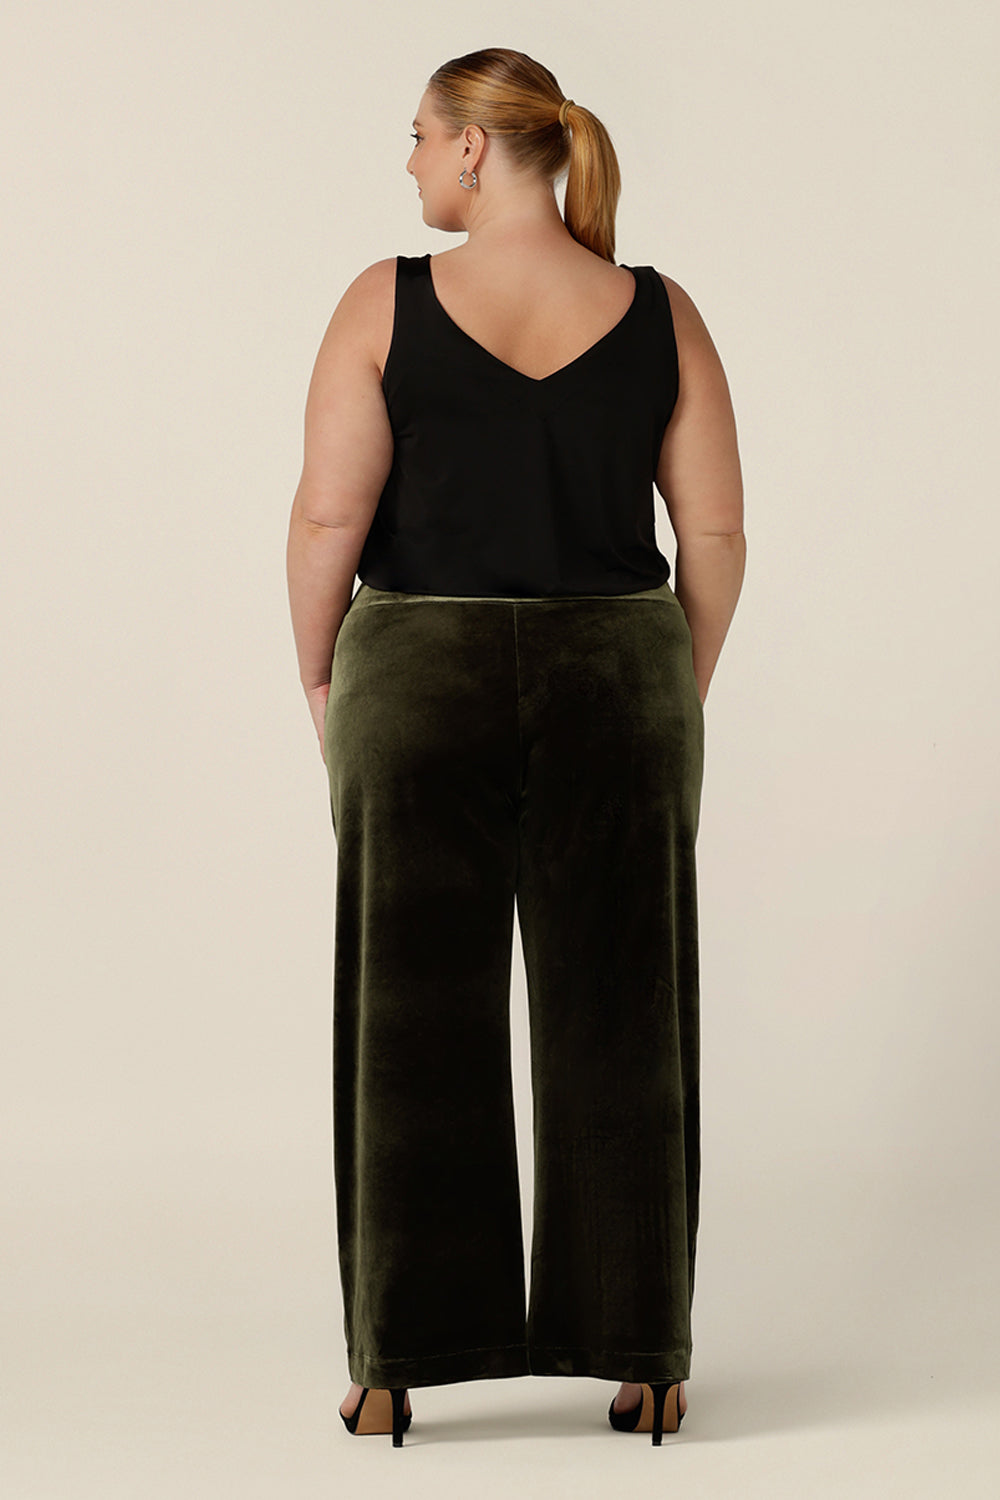 Back view of good cocktail pants for plus size women, the Deni Pants are straight, wide leg pants in green velour. These evening trousers are pull on pants and comfortable in stretch fabric. Shop this occasion and cocktail attire online at Australian fashion brand, Leina & Fleur.